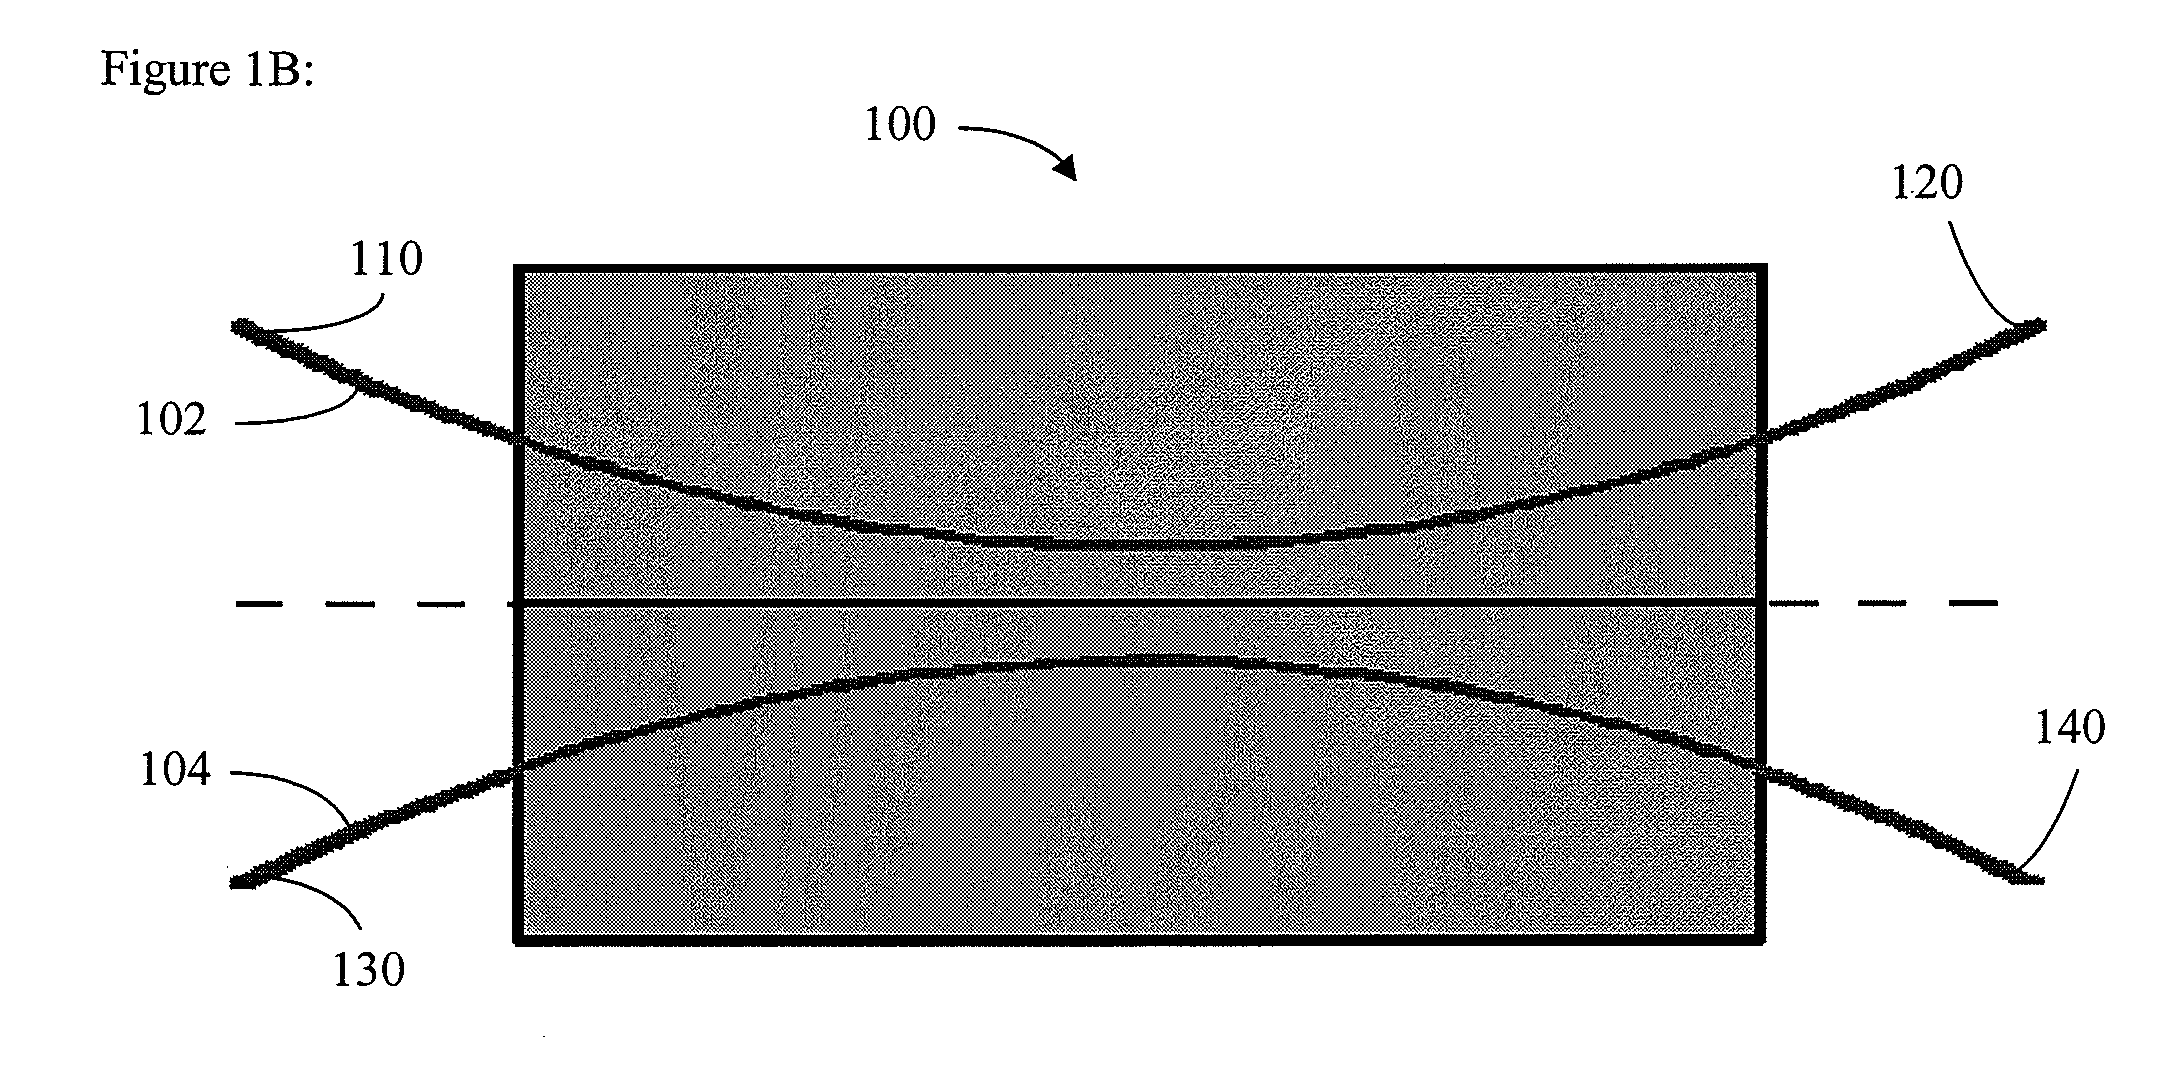 Multiple-core photonic-bandgap fiber with coupling between the cores